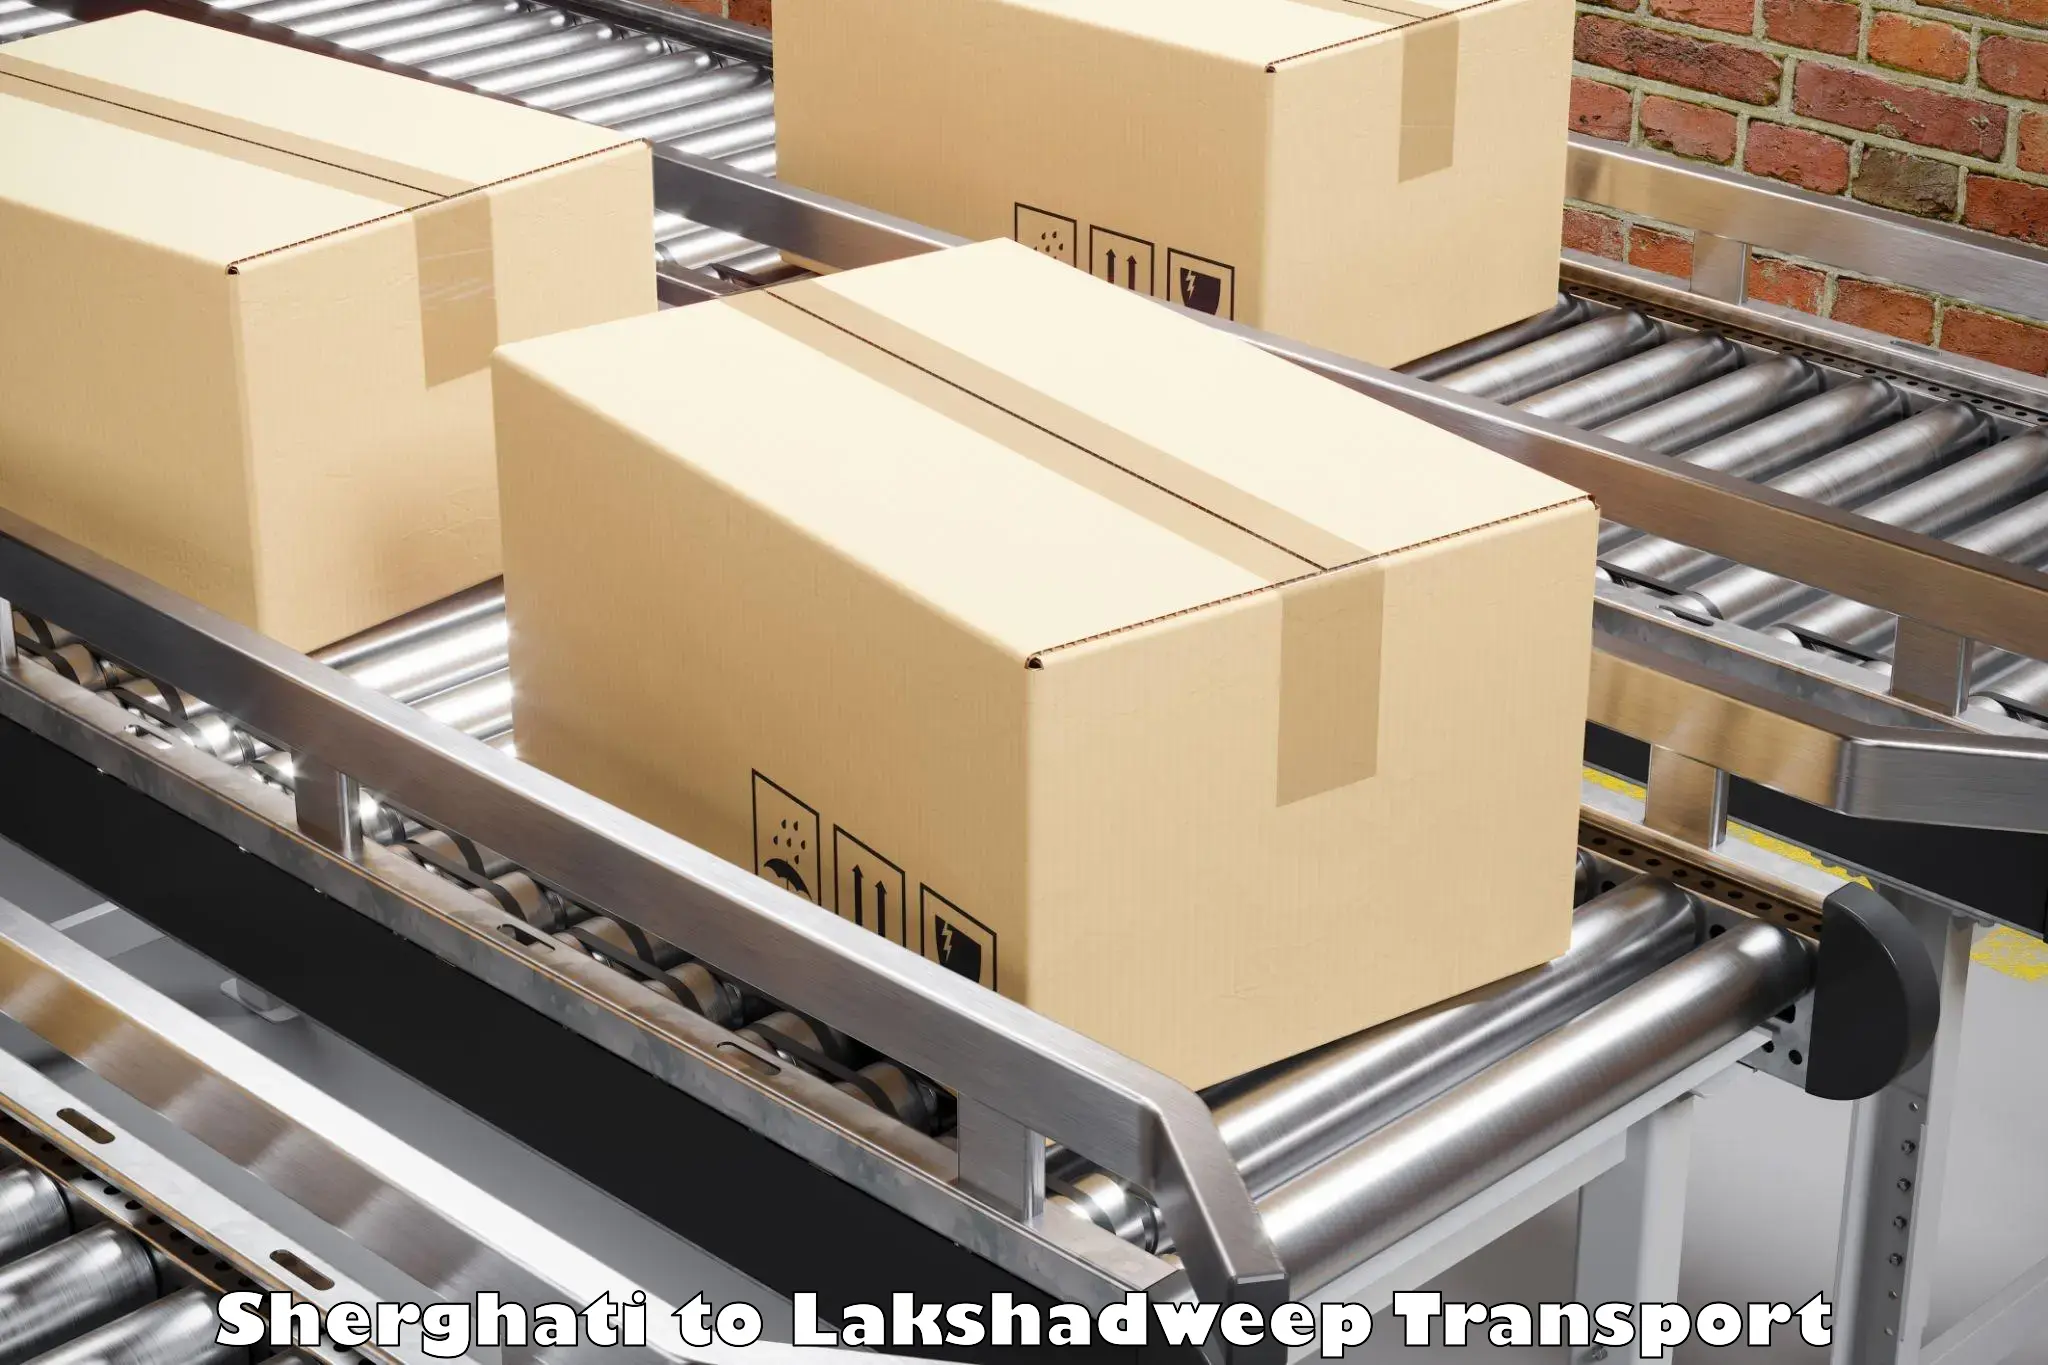 Luggage transport services in Sherghati to Lakshadweep